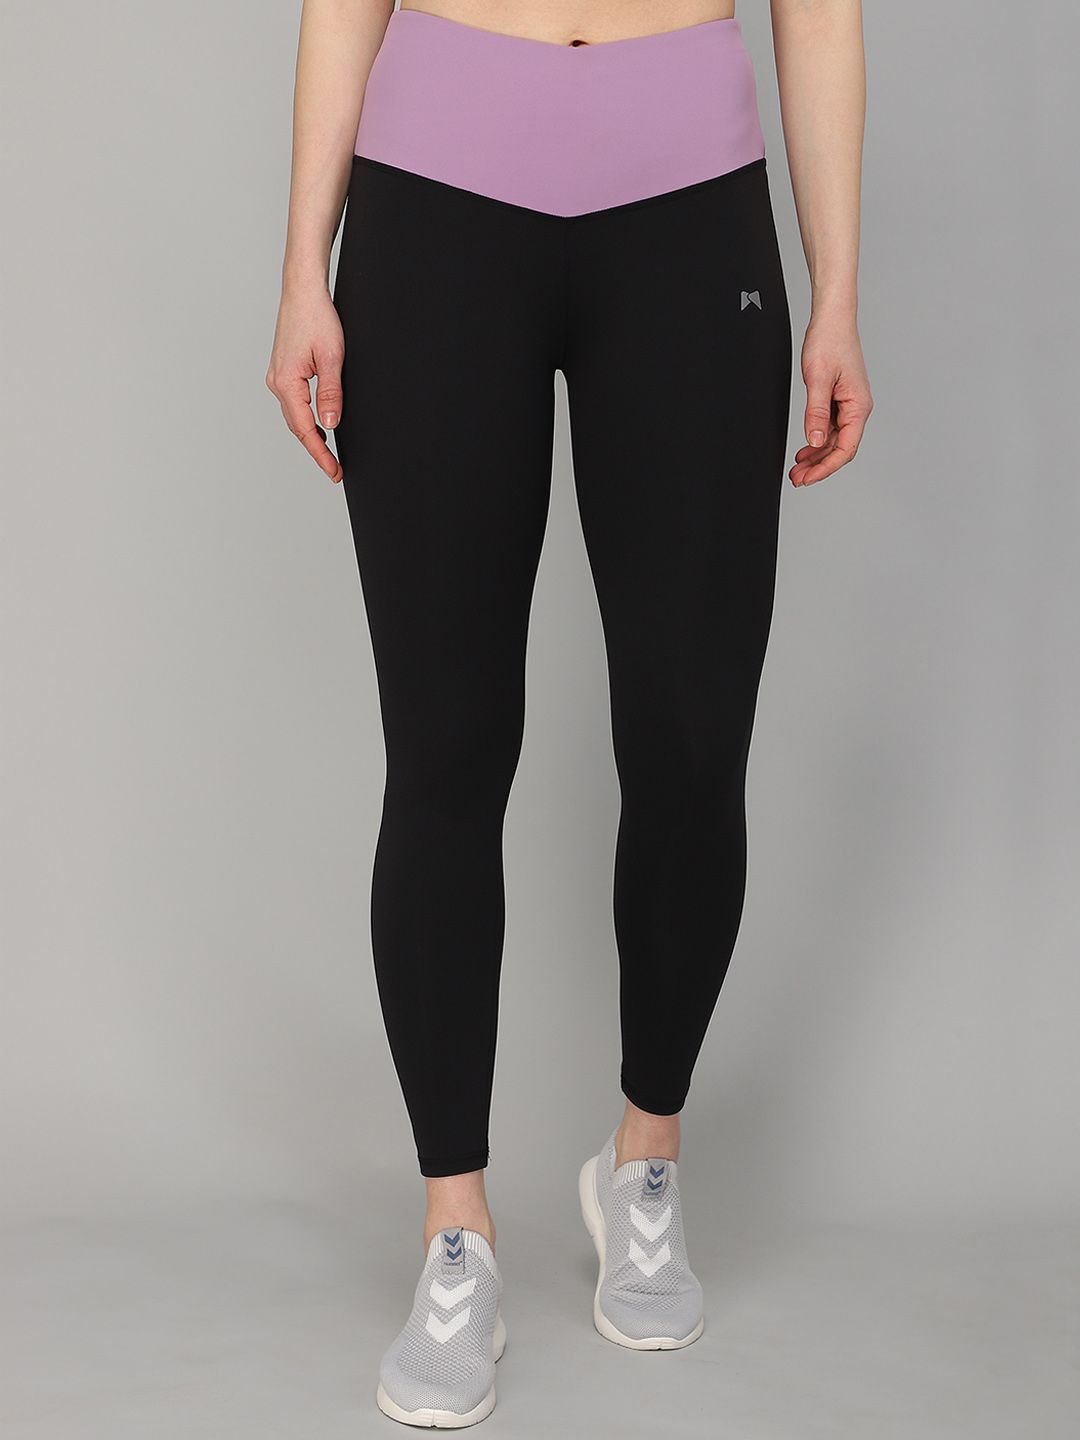 MUSCLE TORQUE Women Black & Purple Solid Bone-Dry Training Tights Price in India